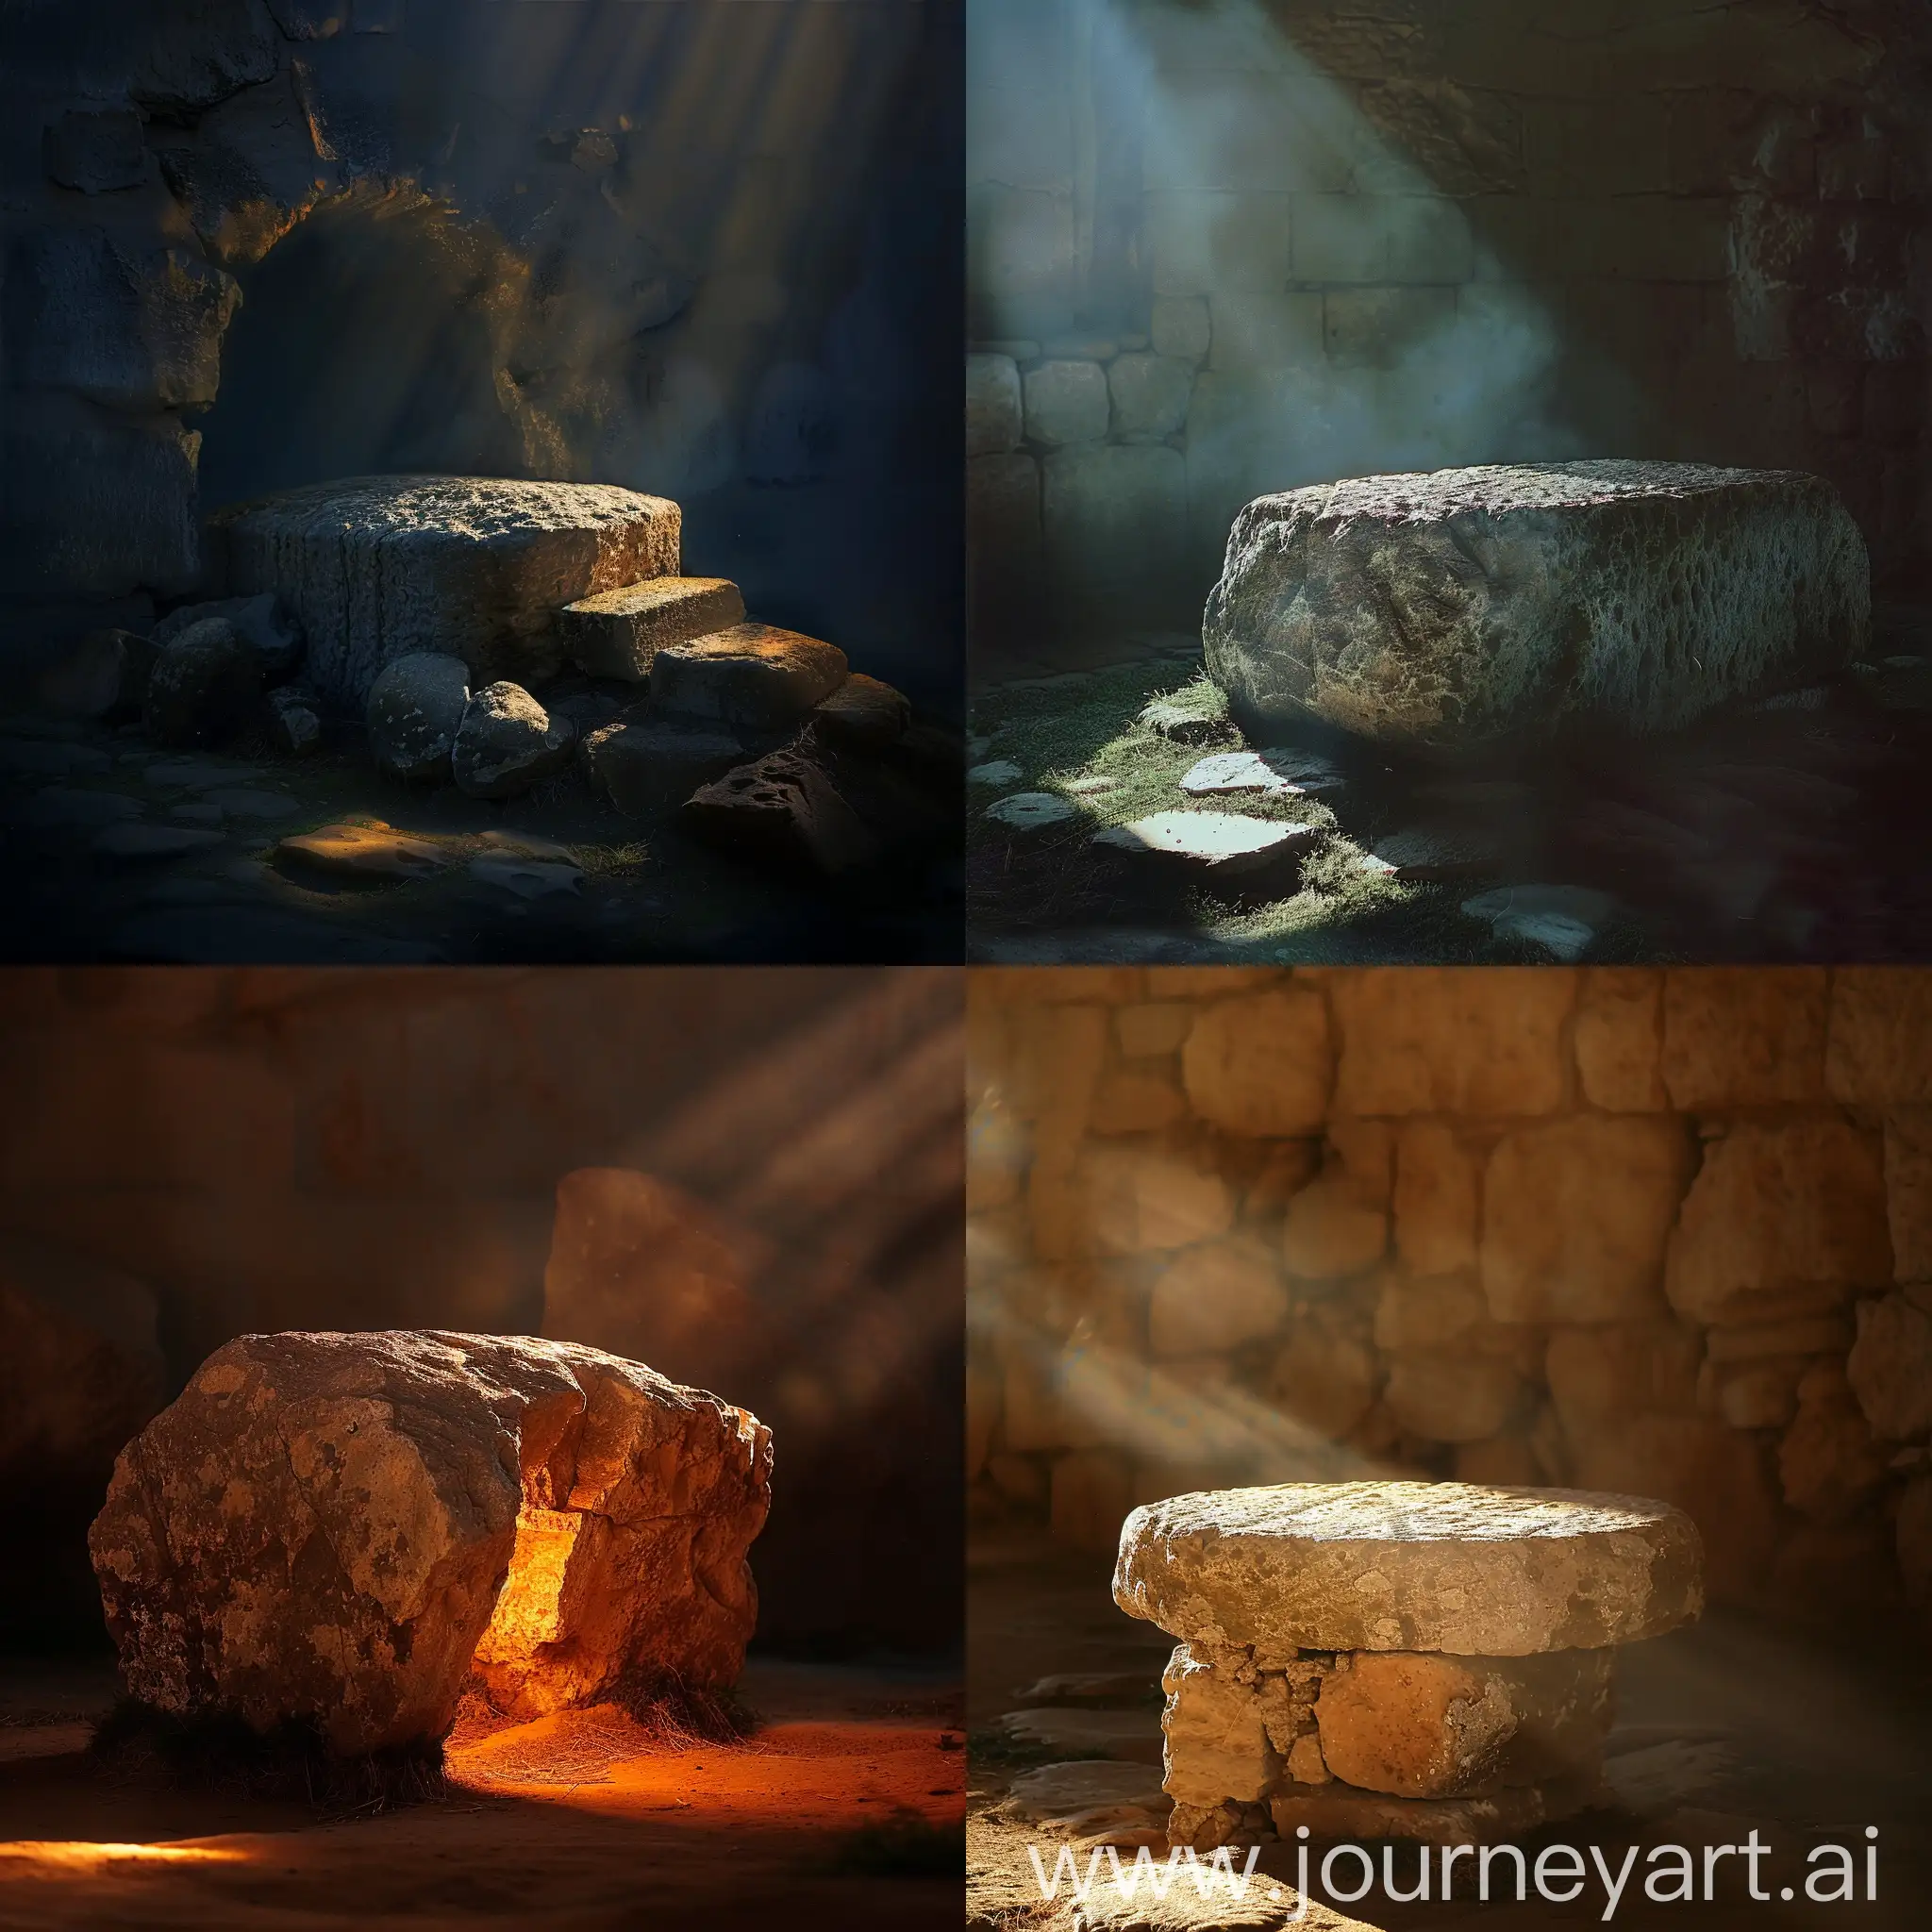 In the easter theme make an image,The stone covering the tomb, partially illuminated by the first rays of dawn.